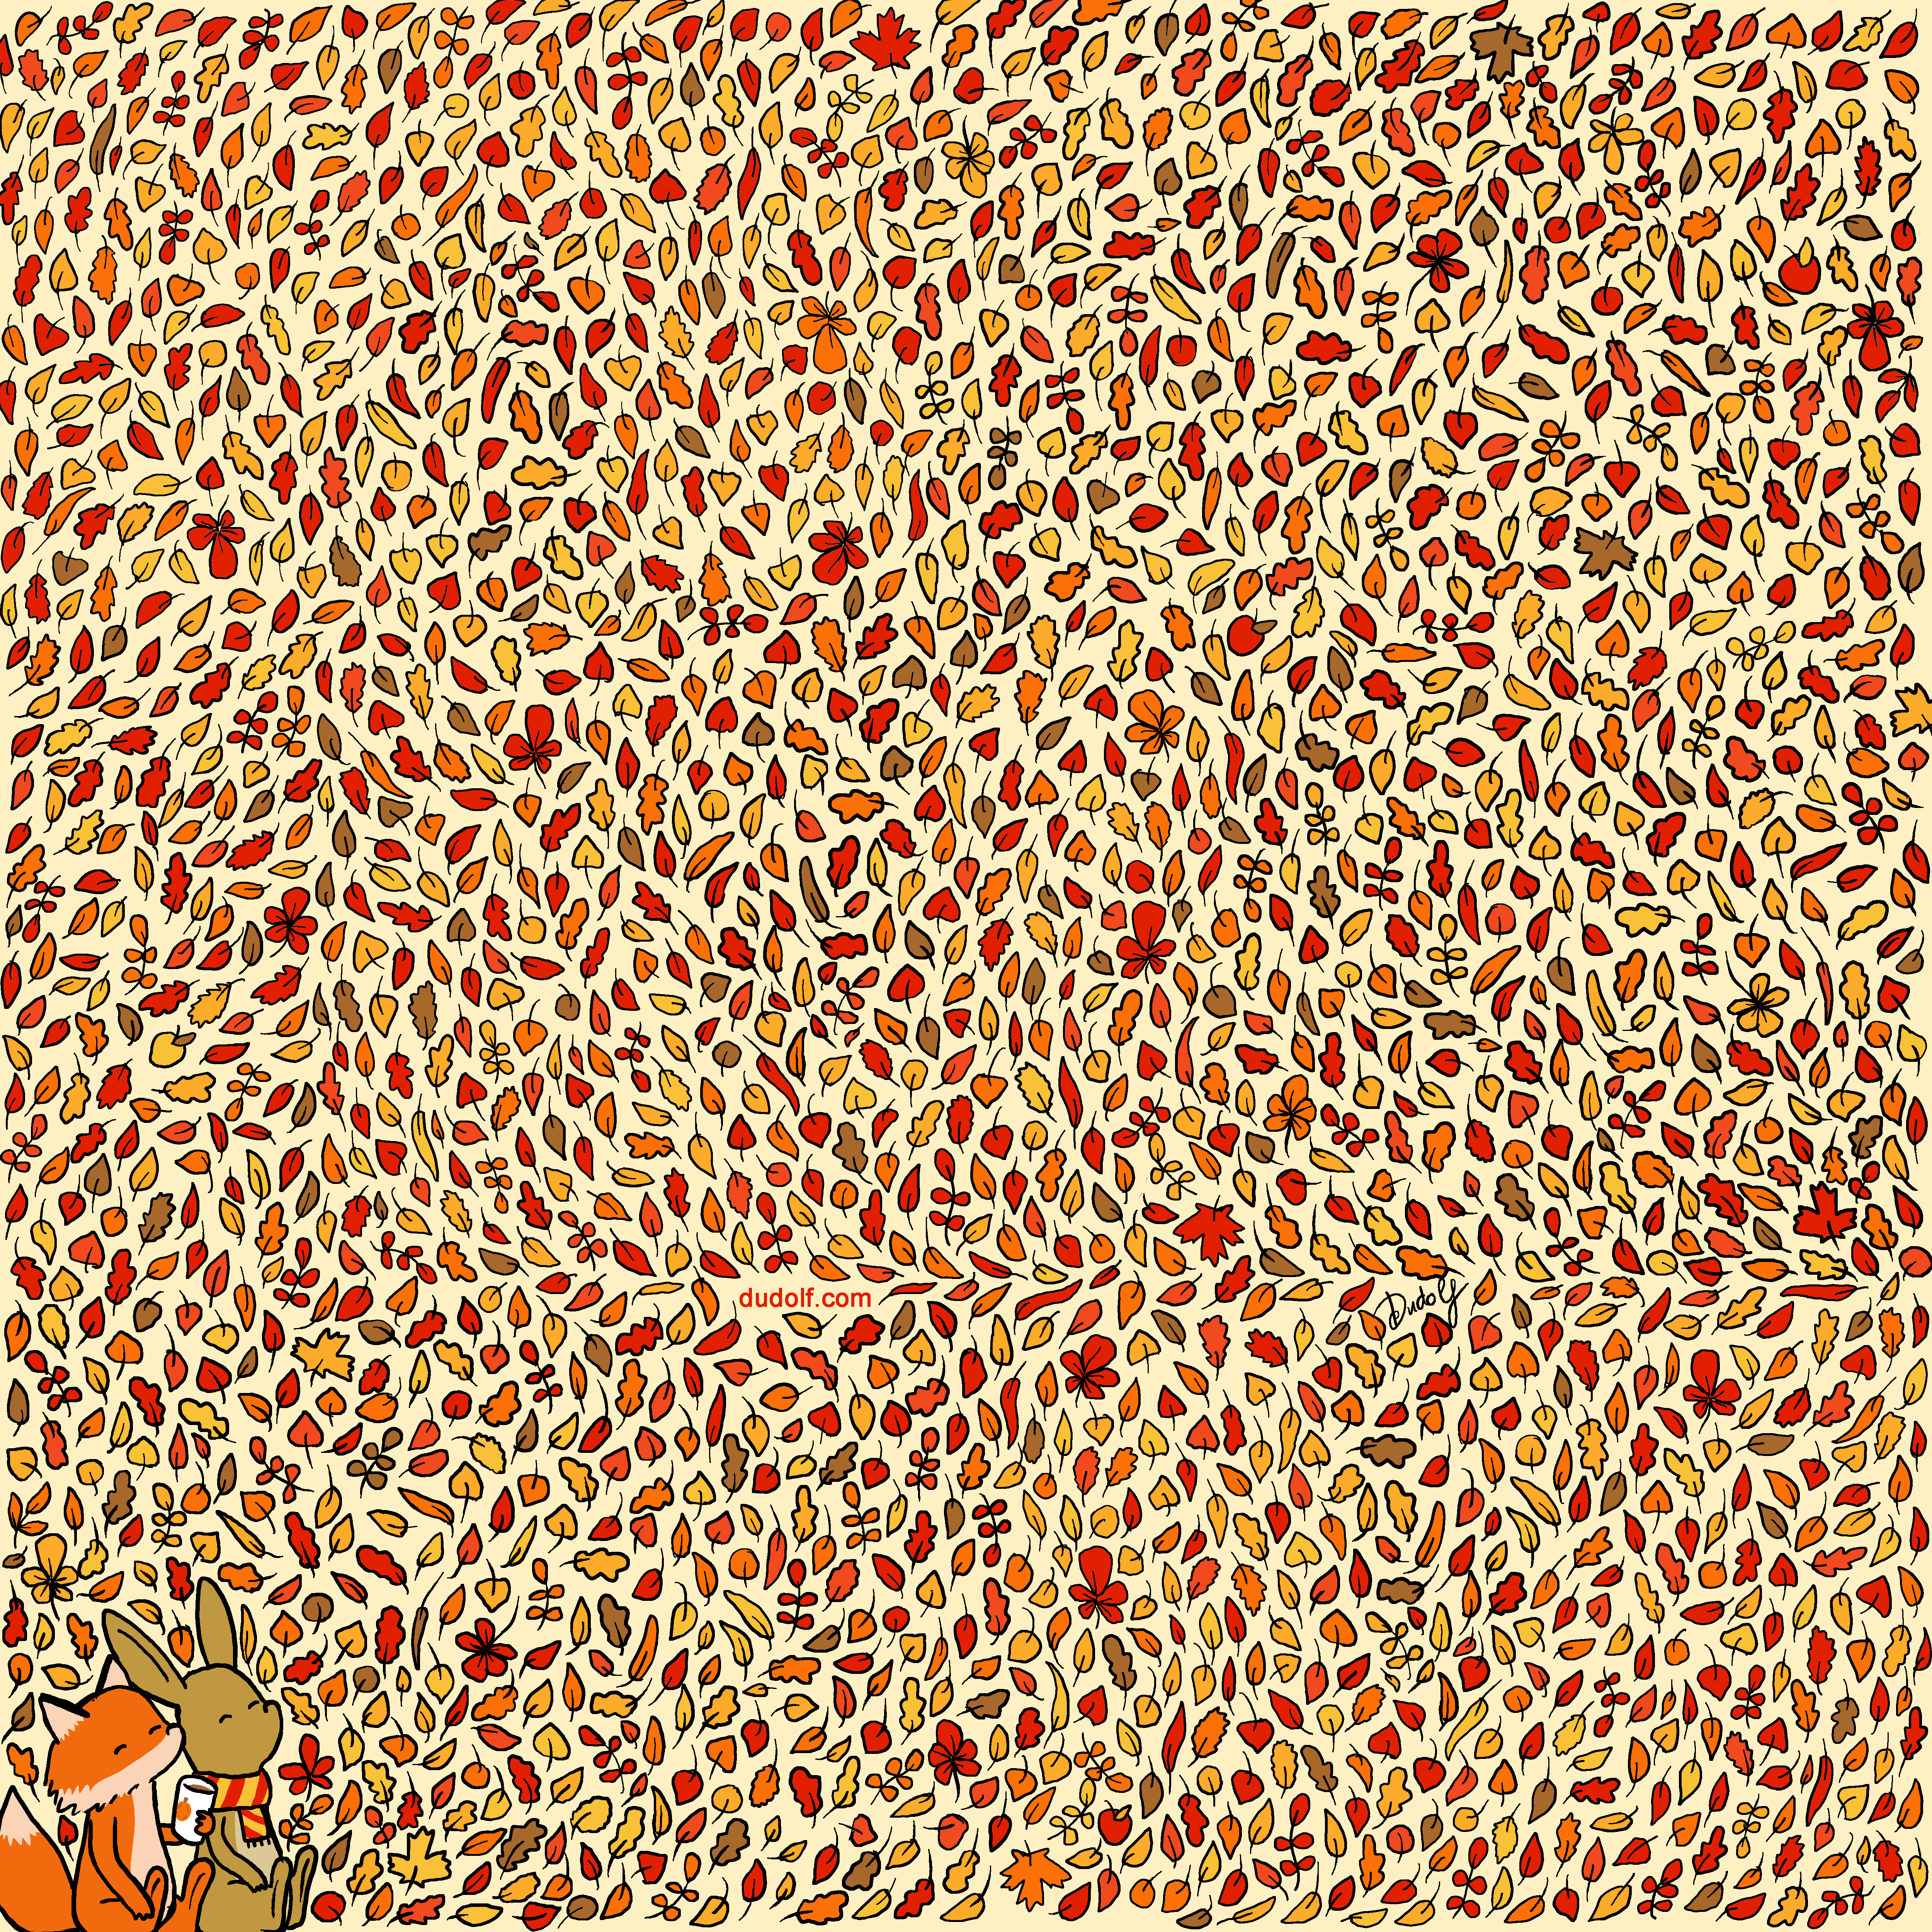 Can You find 4 APPLES among the autumn leaves?